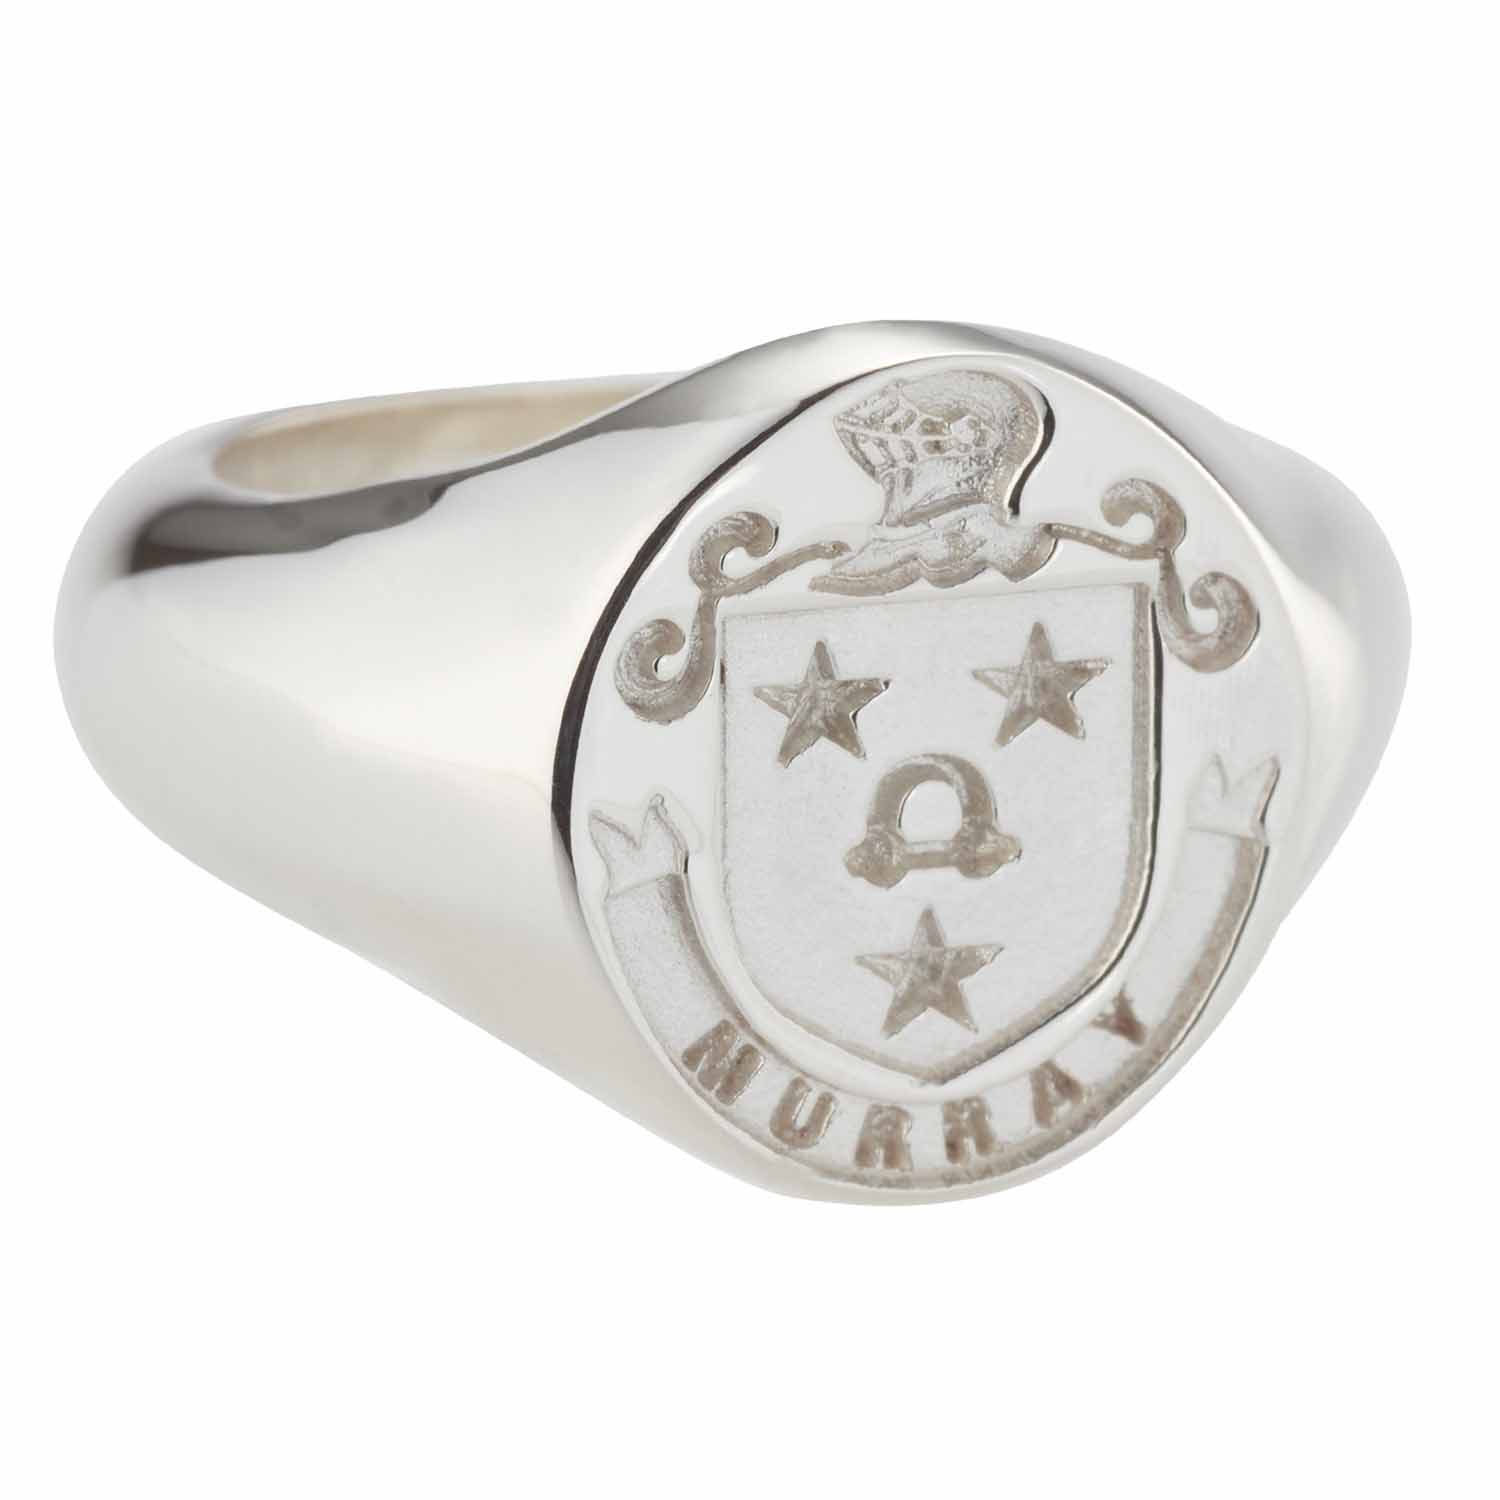 Product image for UPGRADE ORDER 117406 to Personalized Sterling Silver Coat of Arms and Mantle Ring - Large